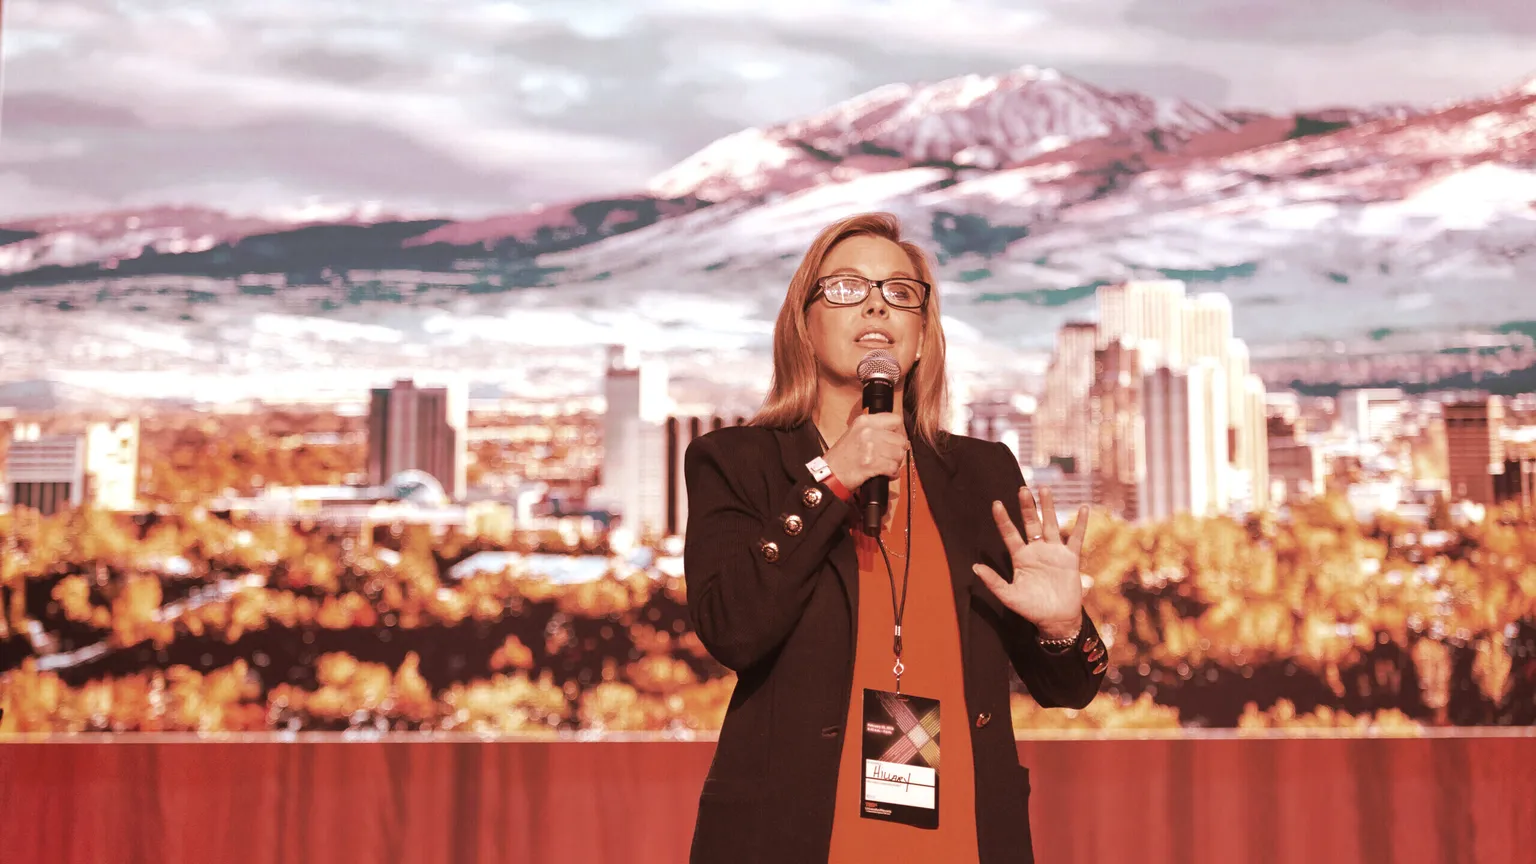 Reno Mayor Hillary Schieve. Image: Flickr Bret Simmons (CC BY-NC-ND 2.0)